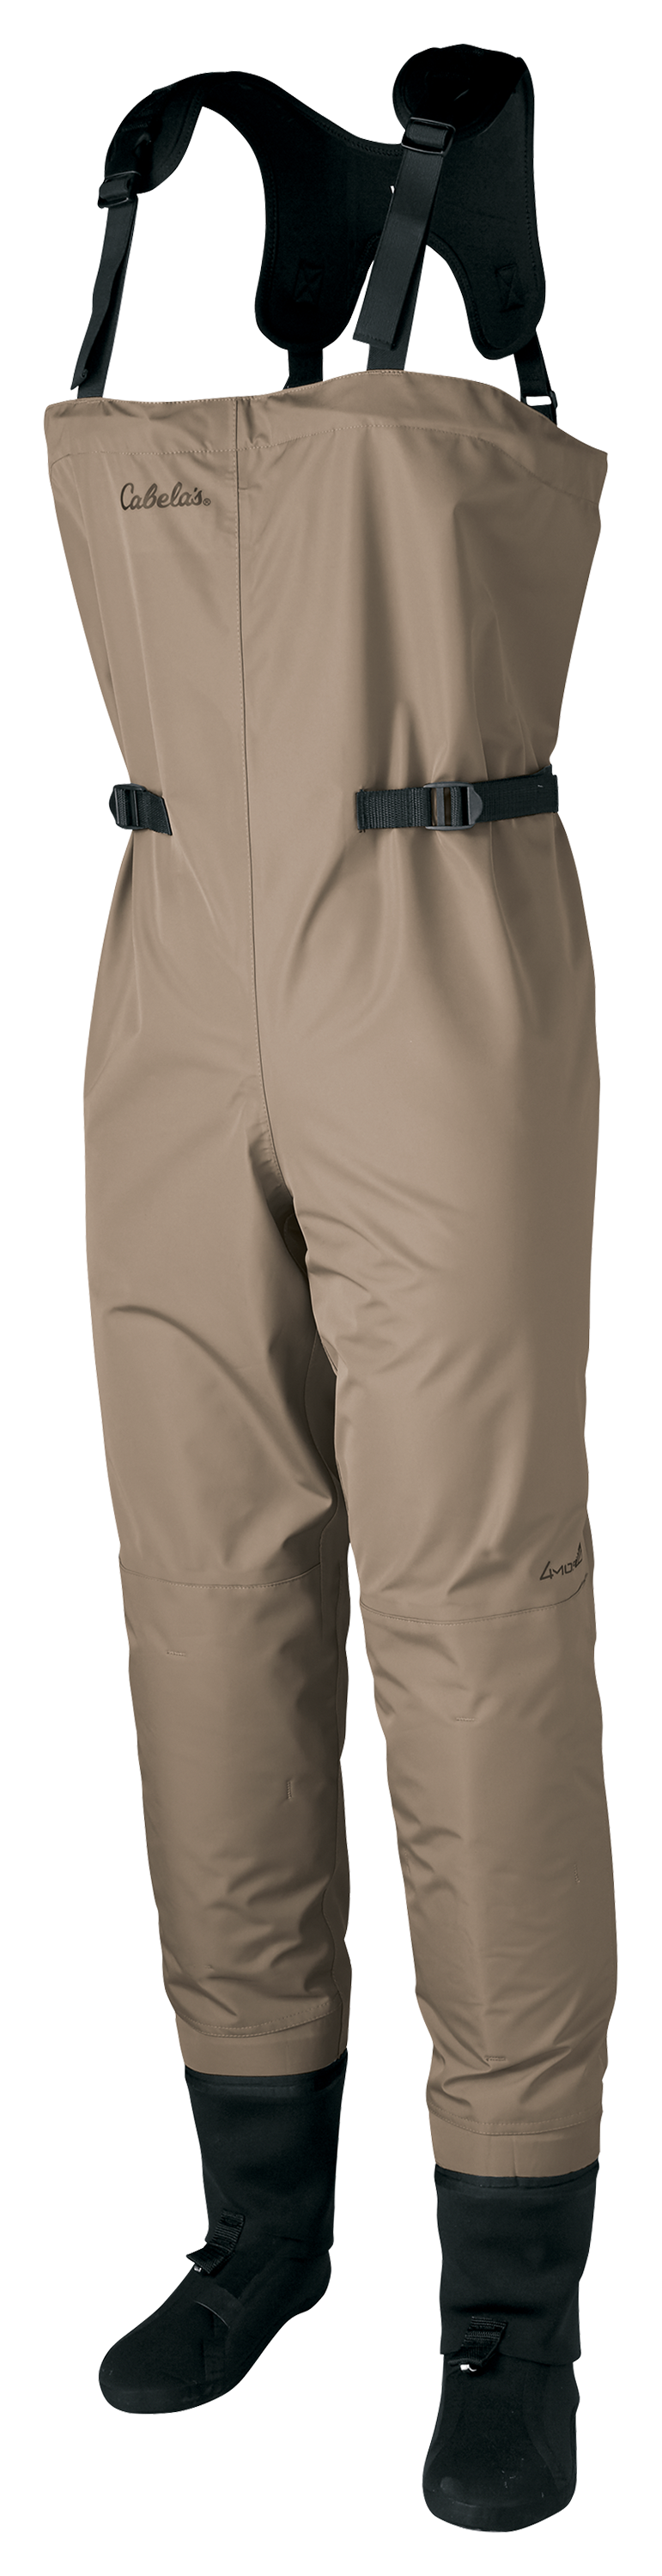 Cabela's Premium Breathable 4MOST DRY-PLUS Stocking-Foot Fishing Waders for Ladies - Light Brown - Medium